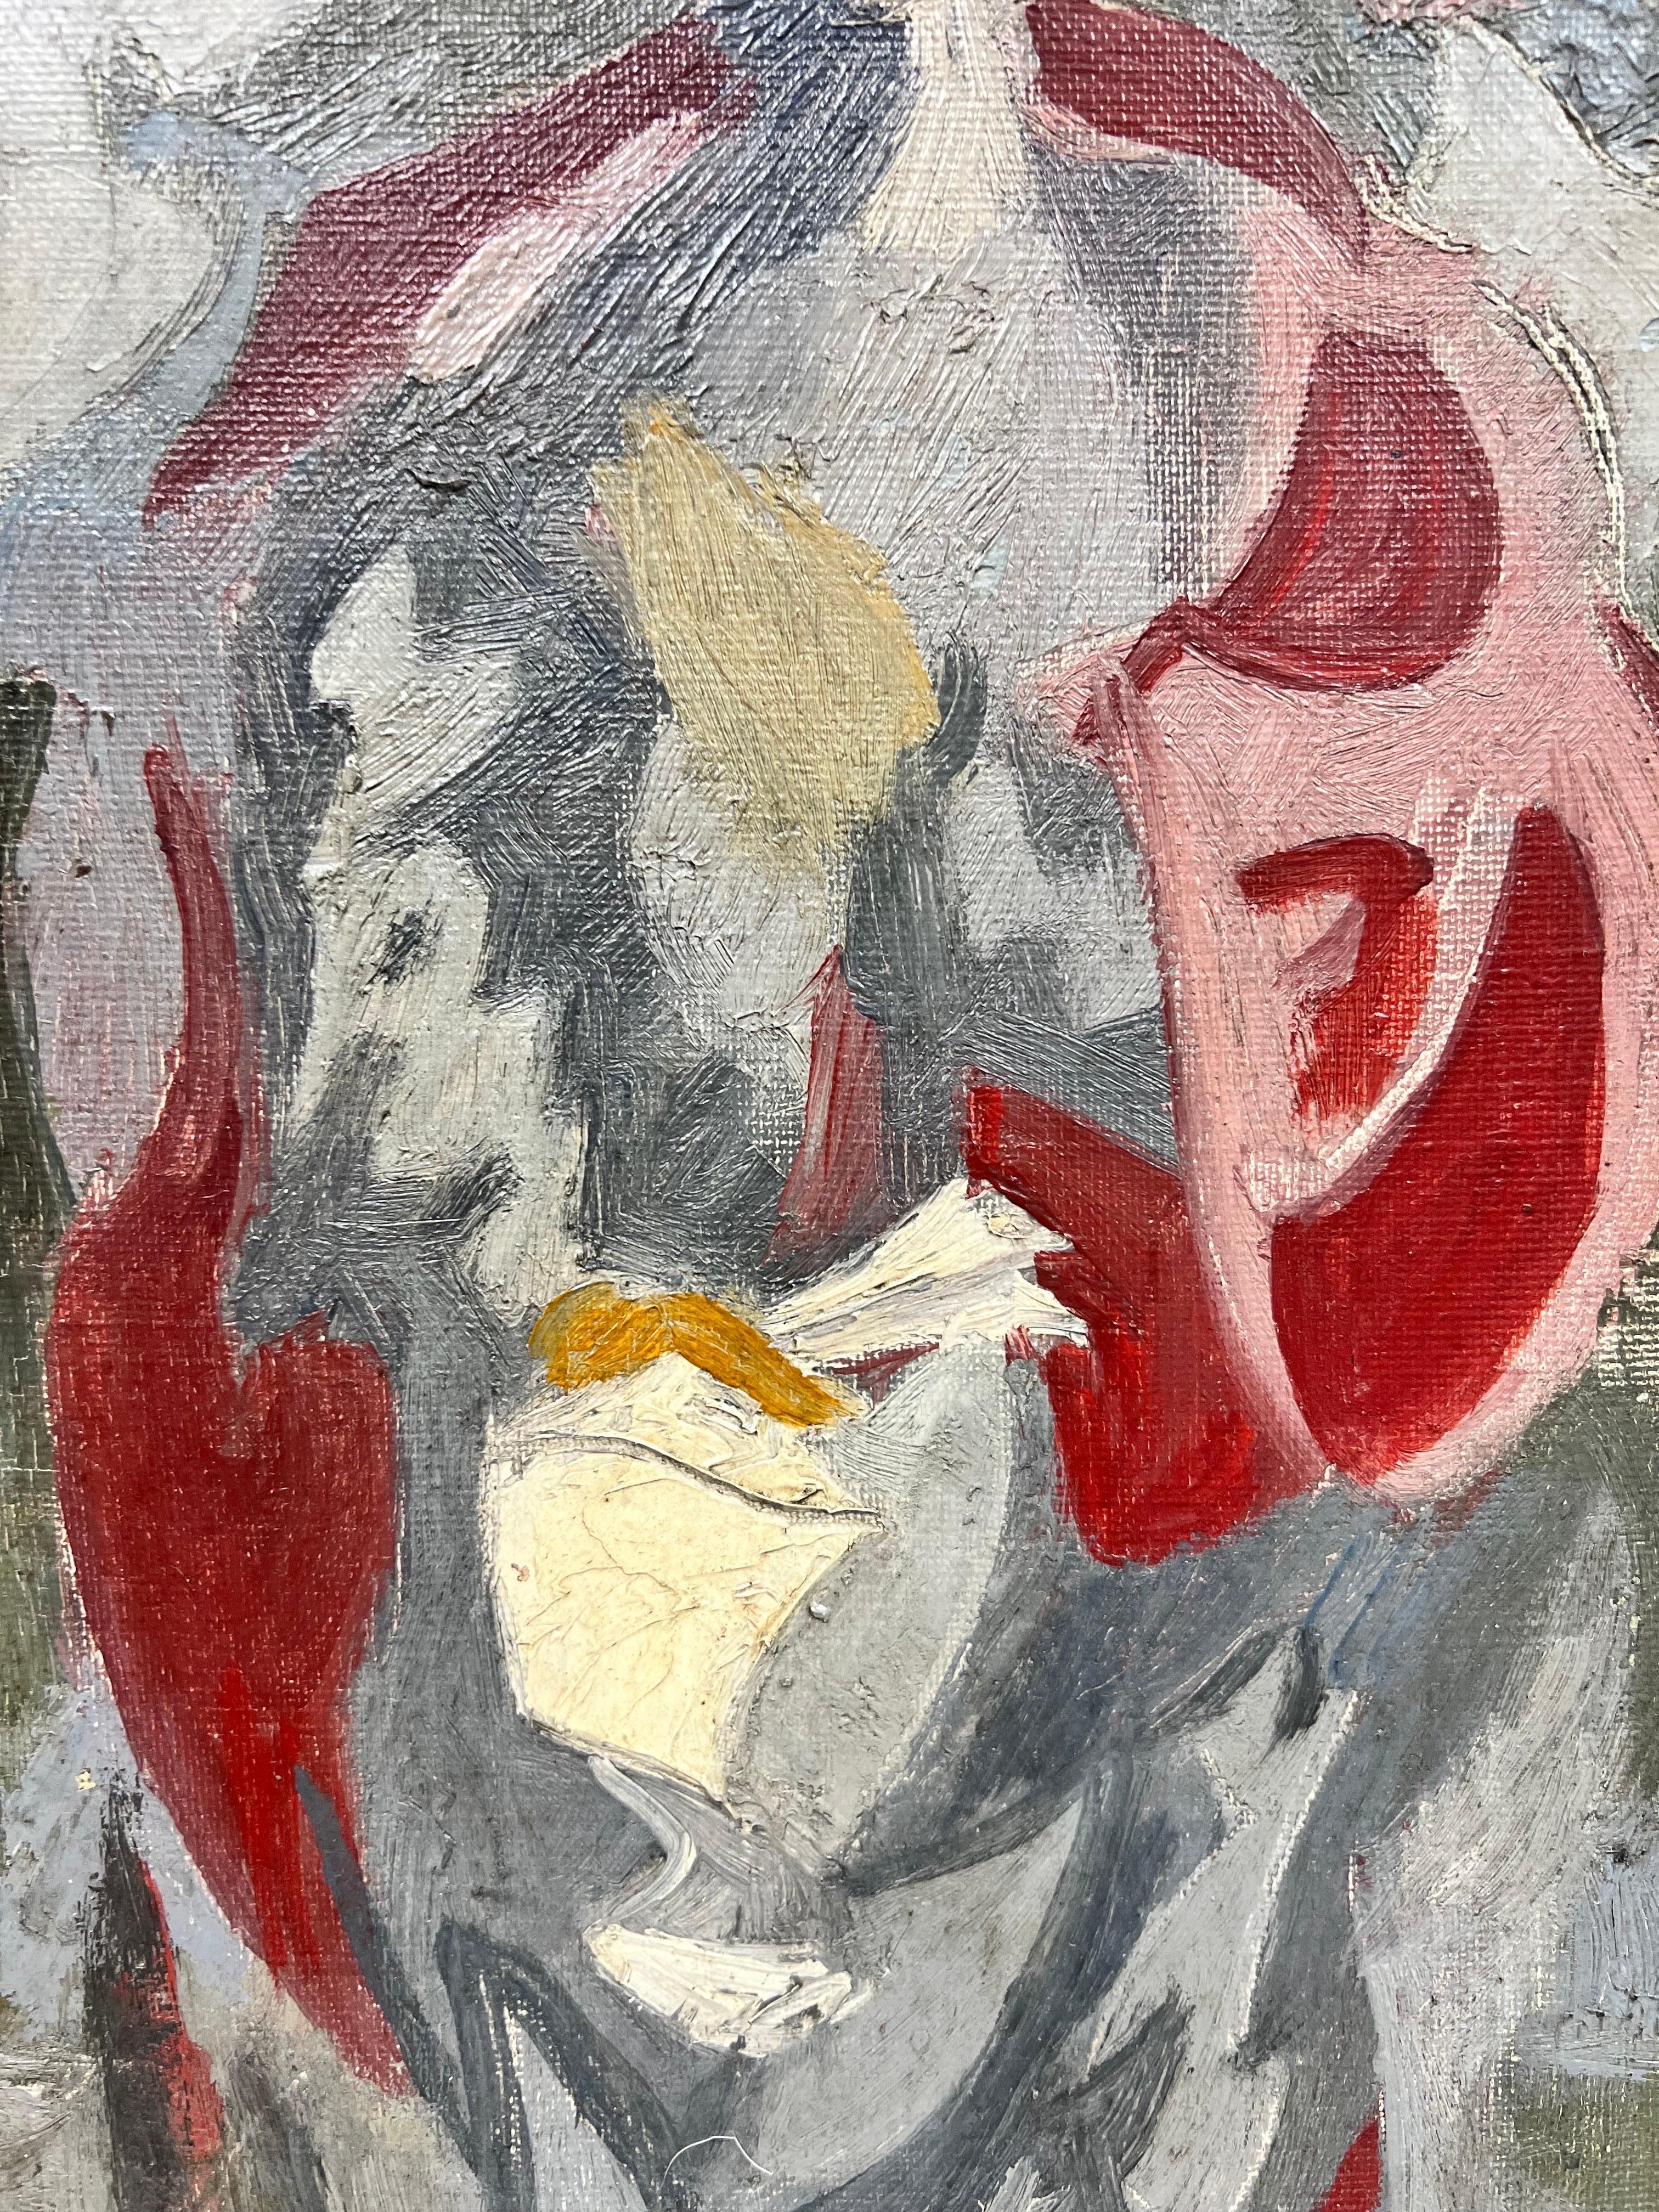 Abstract Figure
French Modernist, circa 1950's
oil on canvas
16 x 8.5 inches
provenance: private collection, France
The painting is in good and presentable condition.
